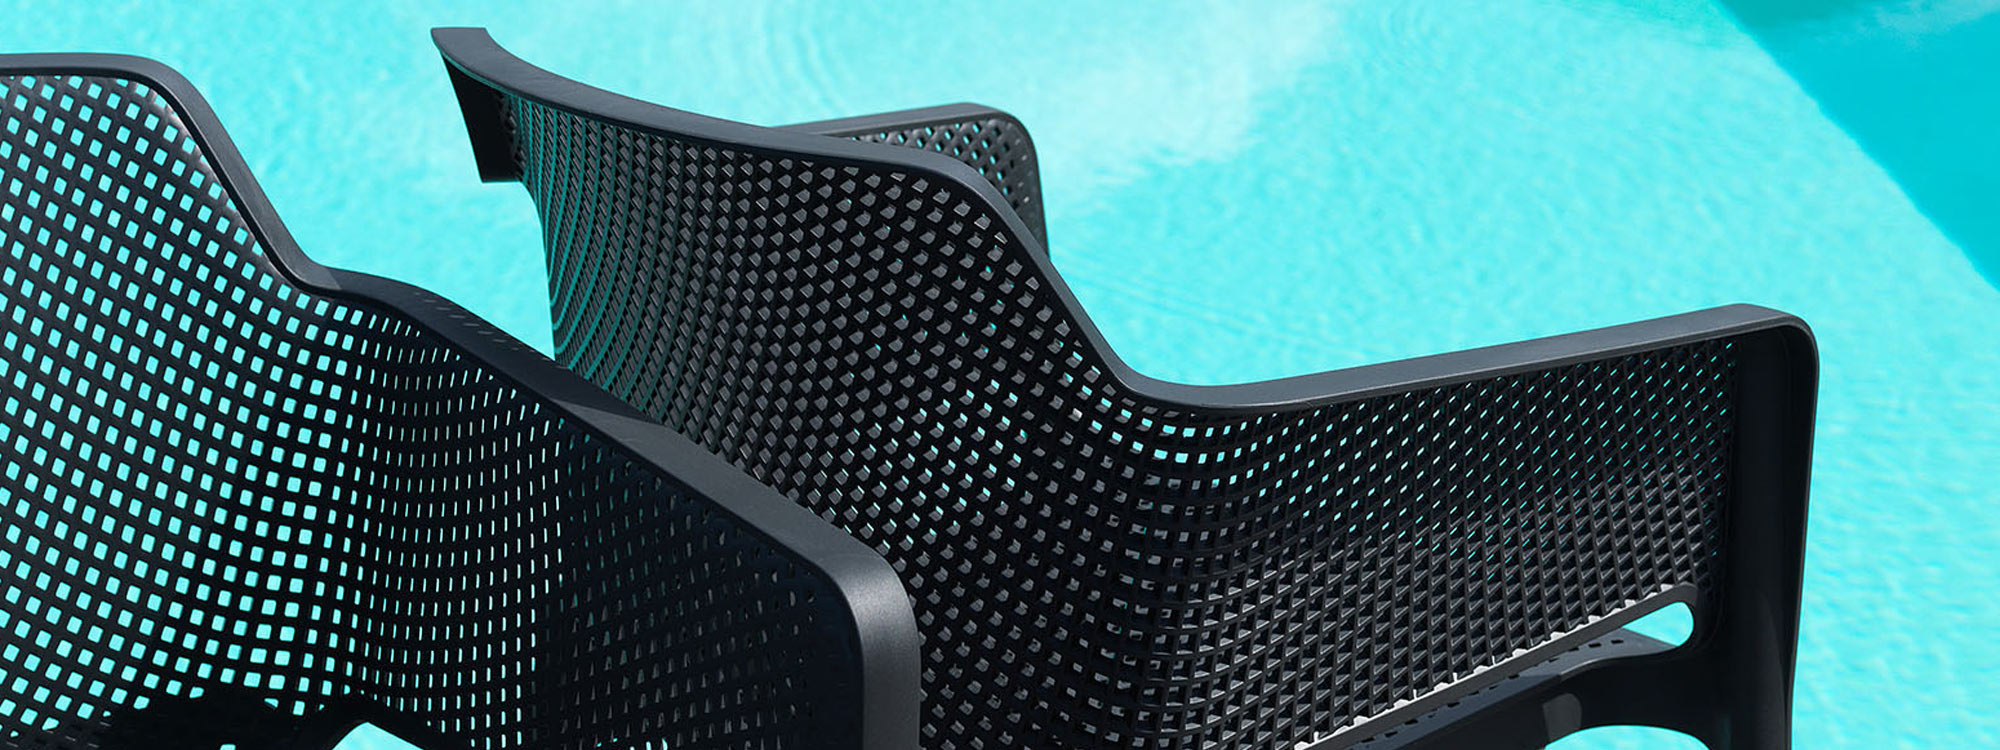 Image of detail of Nardi Net garden chair's black perforated polypropylene back, with azure water of swimming pool in the background